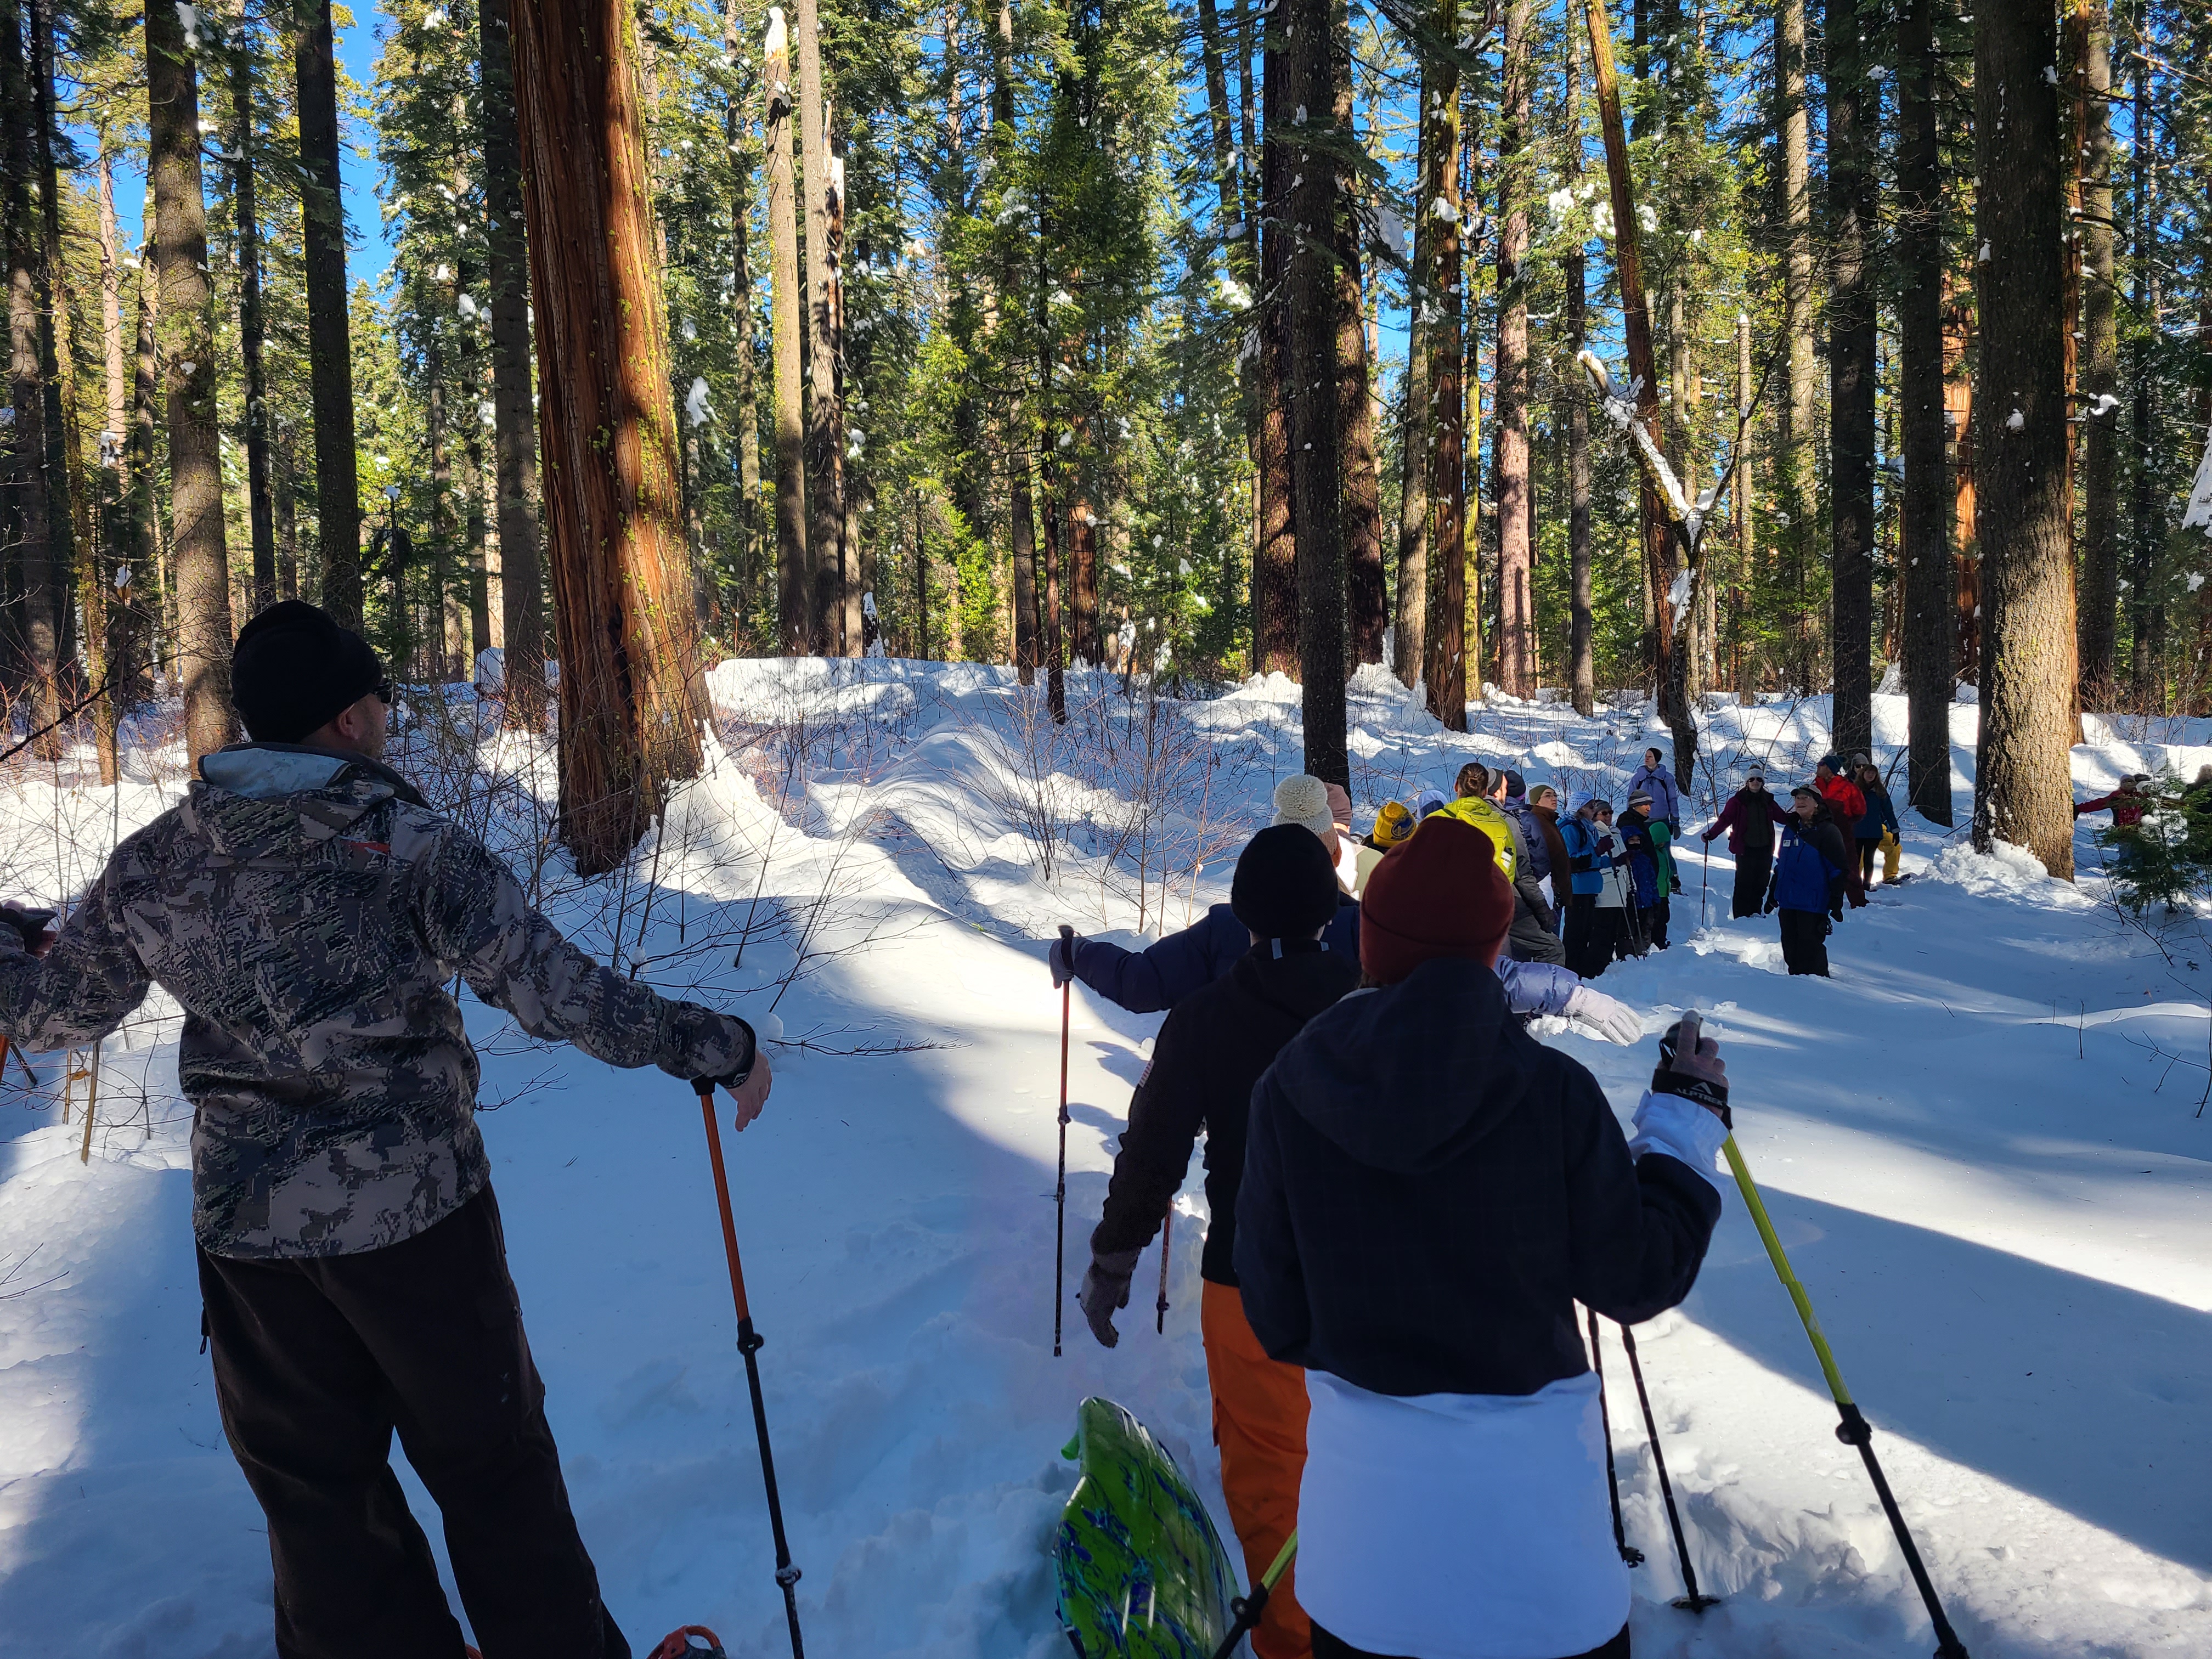 Visitors on Snowshoes Listening to a Volunteer Trail Guide